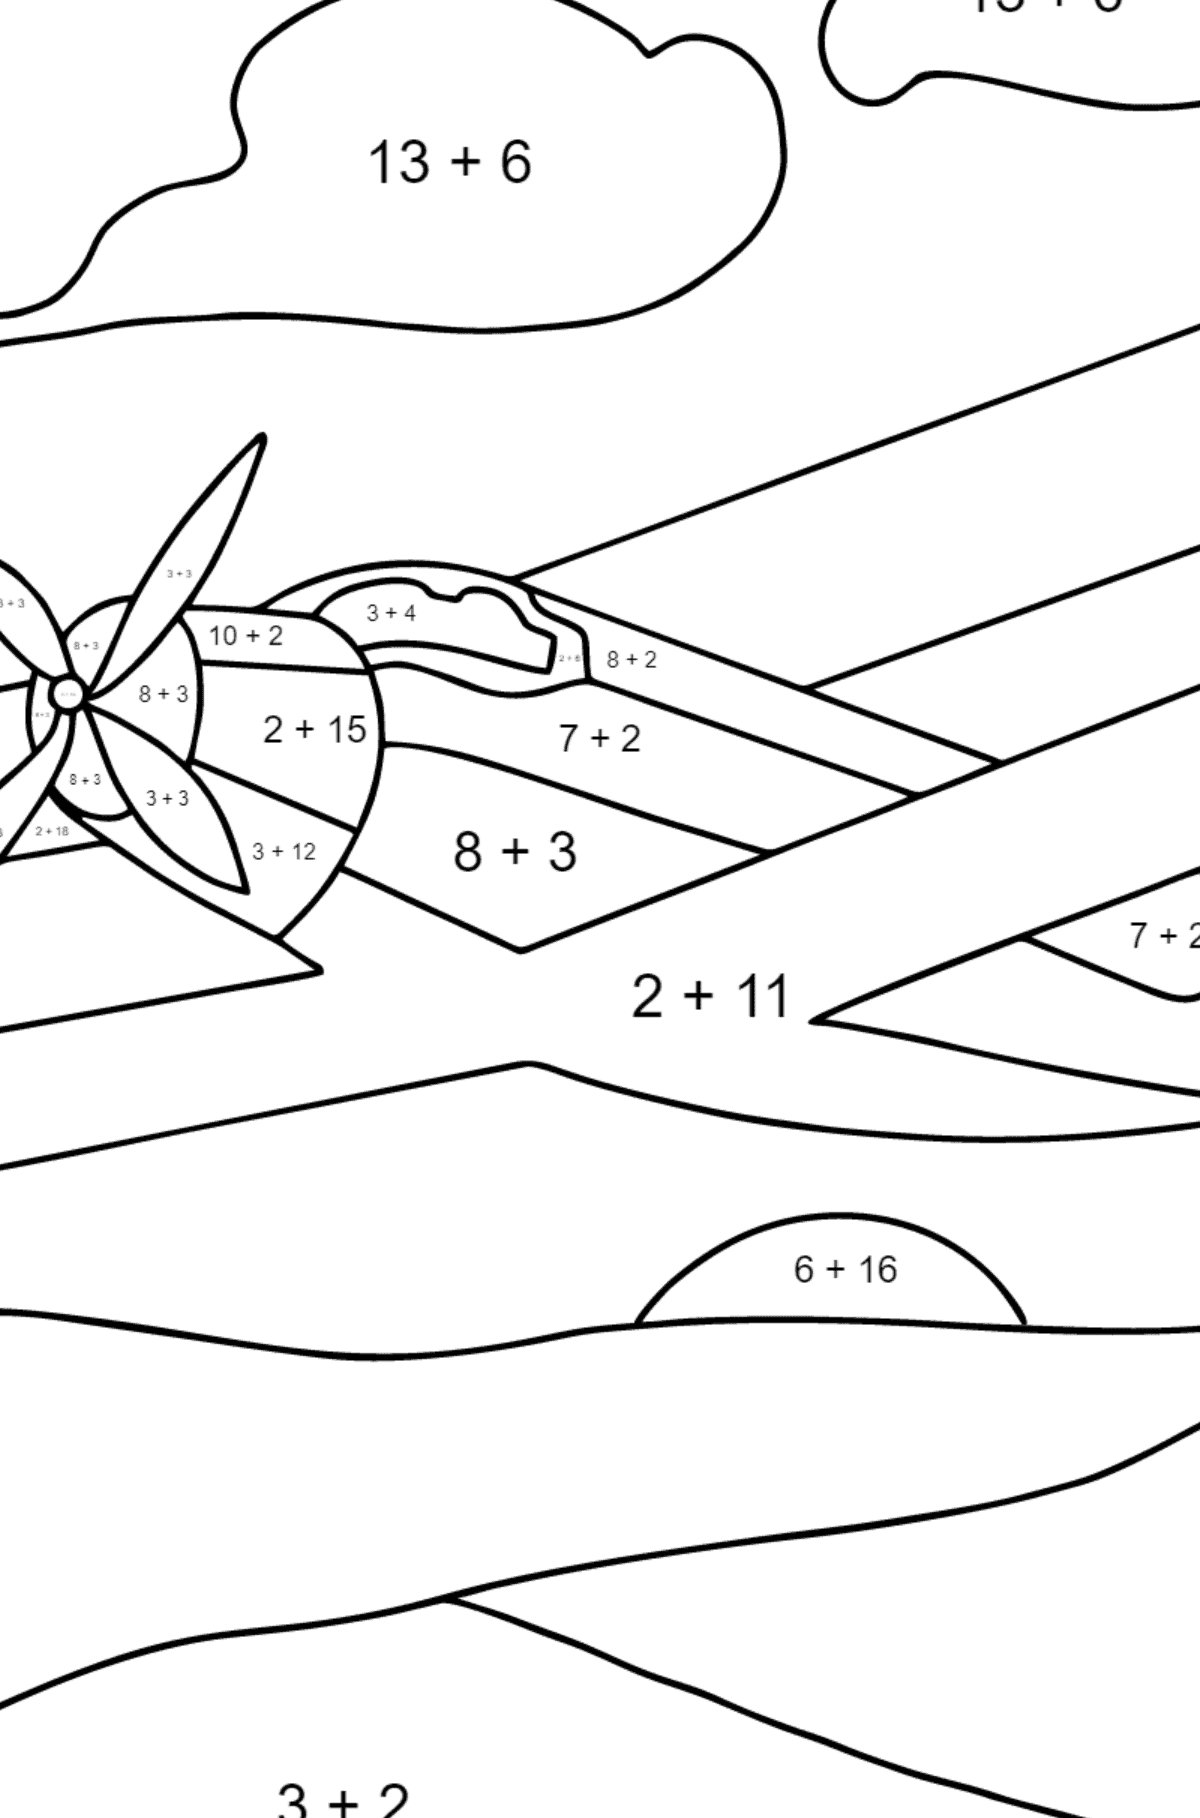 Coloring Page - A Biplane - Math Coloring - Addition for Children